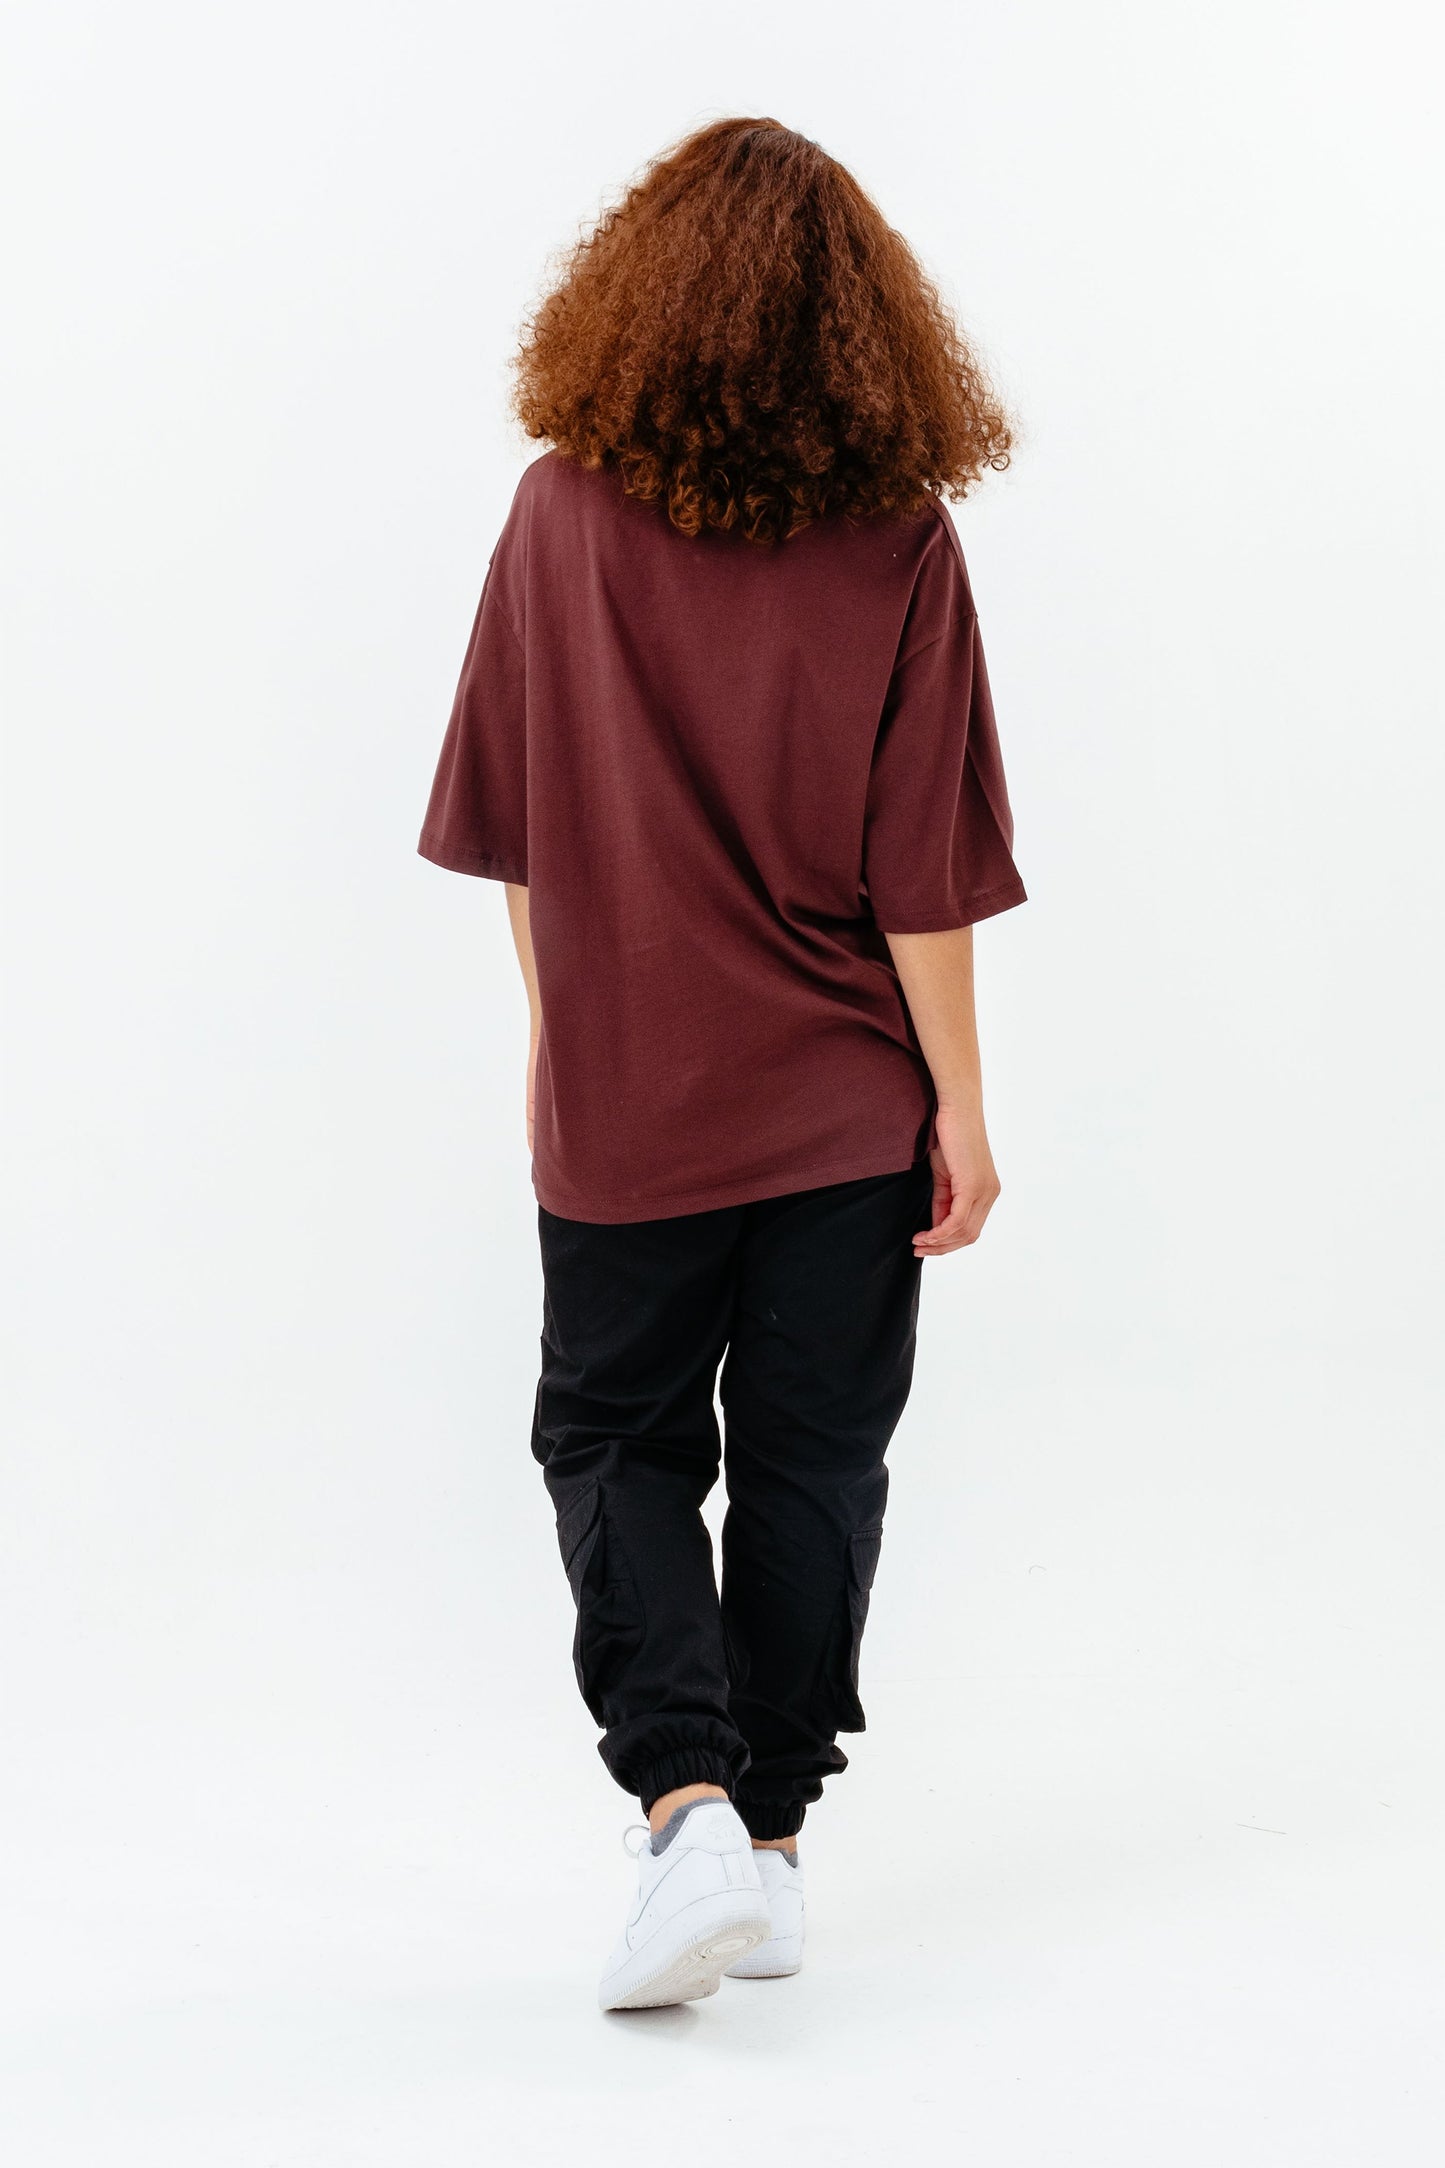 CONTINU8 RED OVERSIZED T-SHIRT